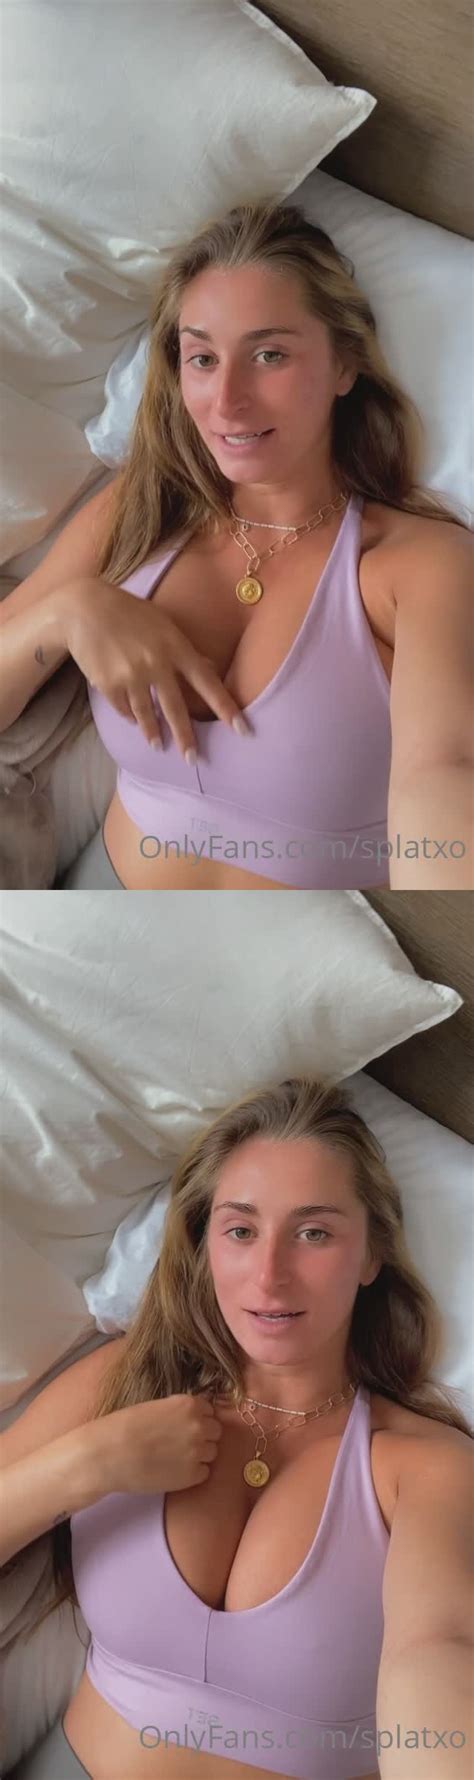 Ruby Reid Aka Splatxo Natural Tits And A Big Natural Ass Will Not Leave A Bad Impression Page